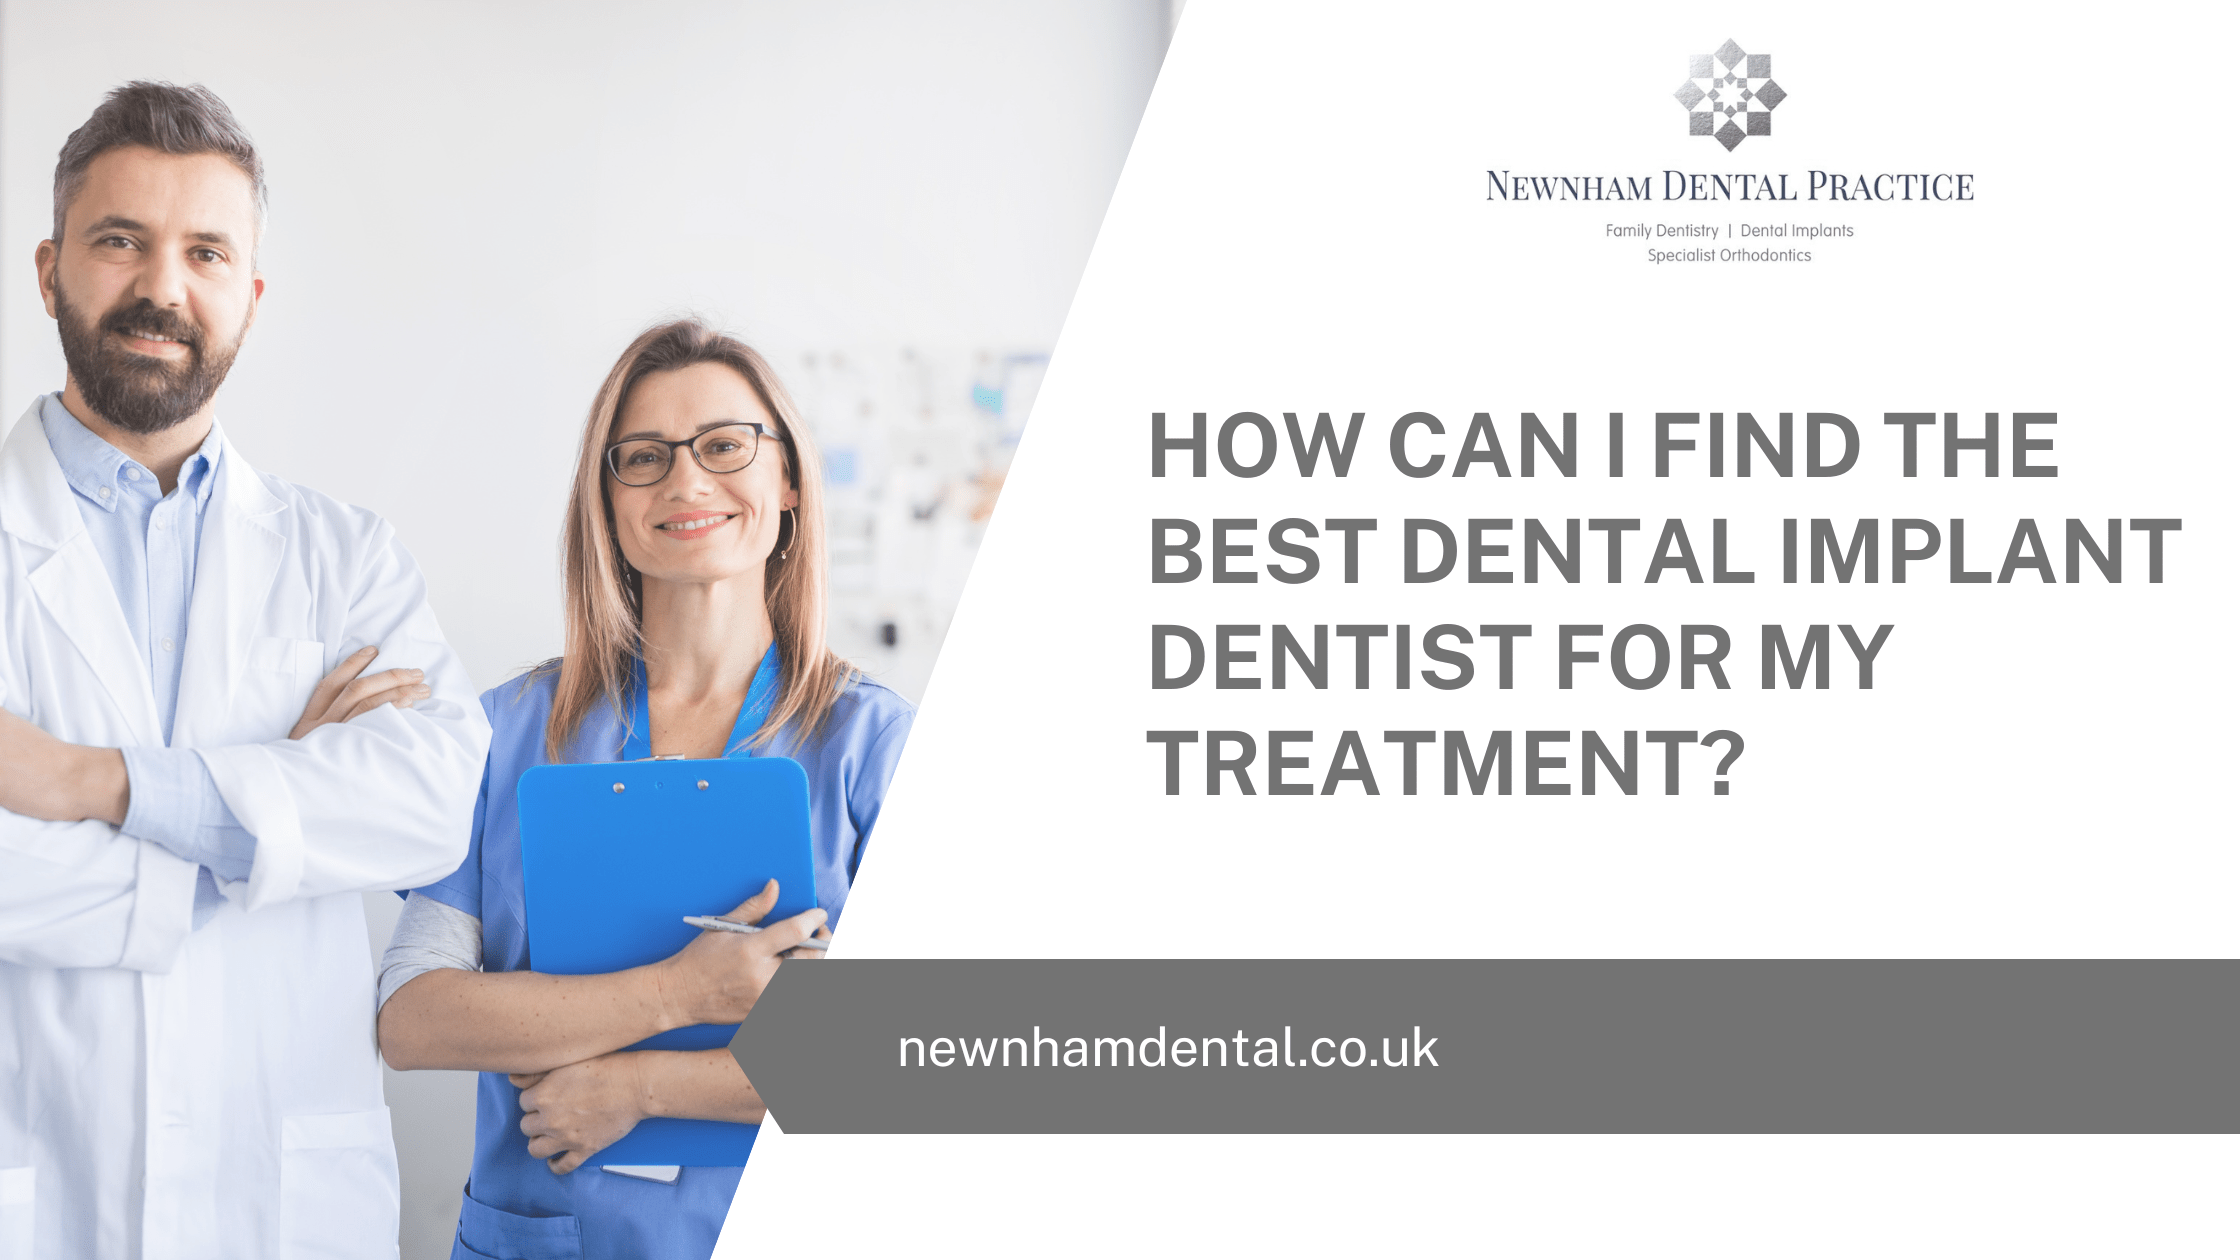 How Can I Find The Best Dental Implant Dentist For My Treatment?